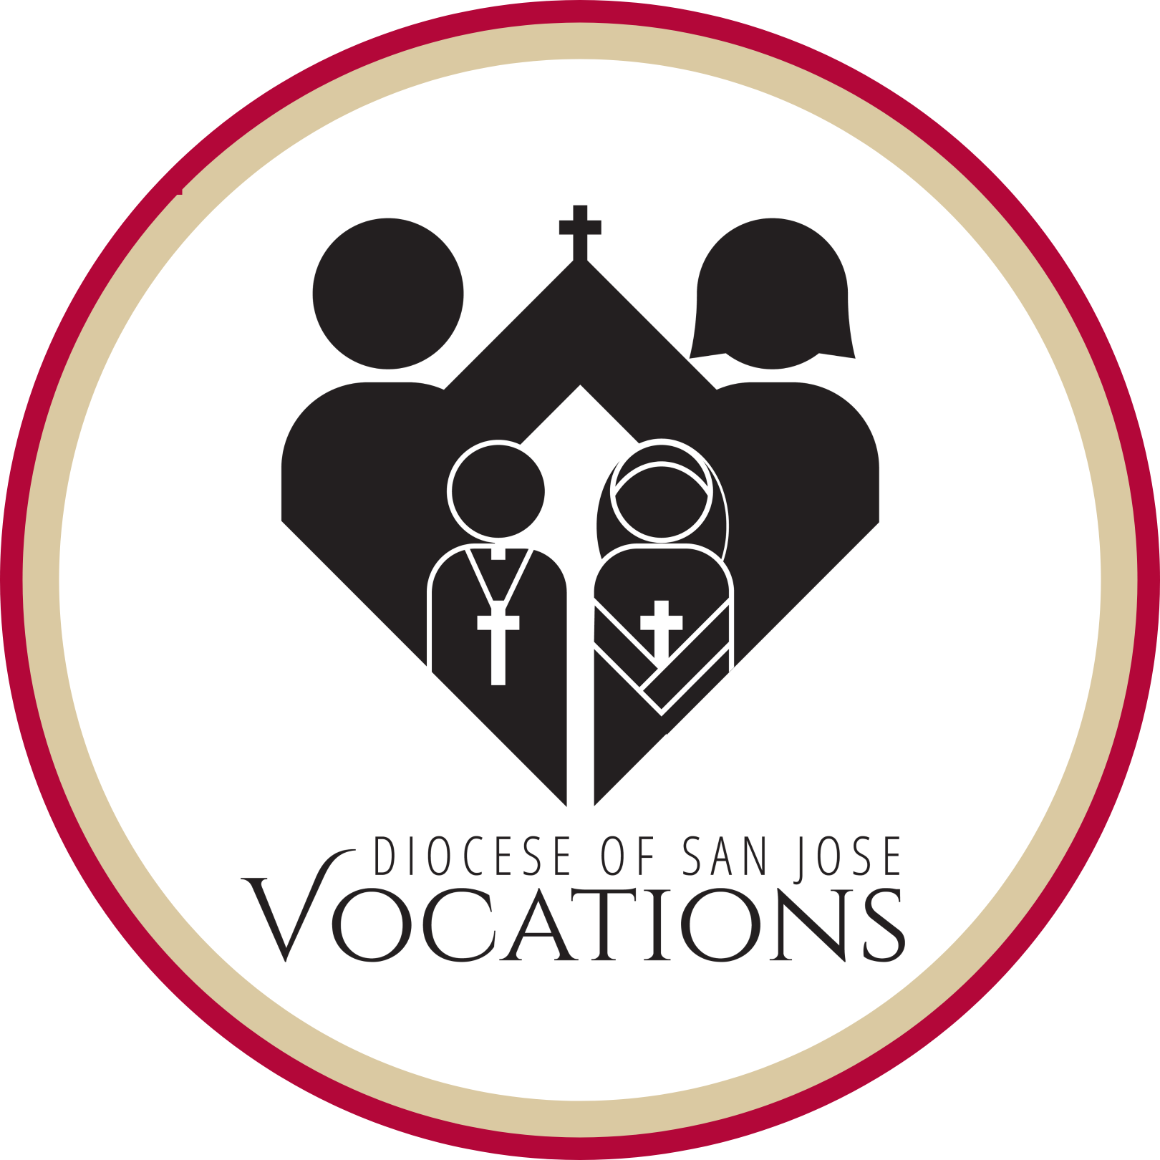 Diocese of San Jose Vocations logo